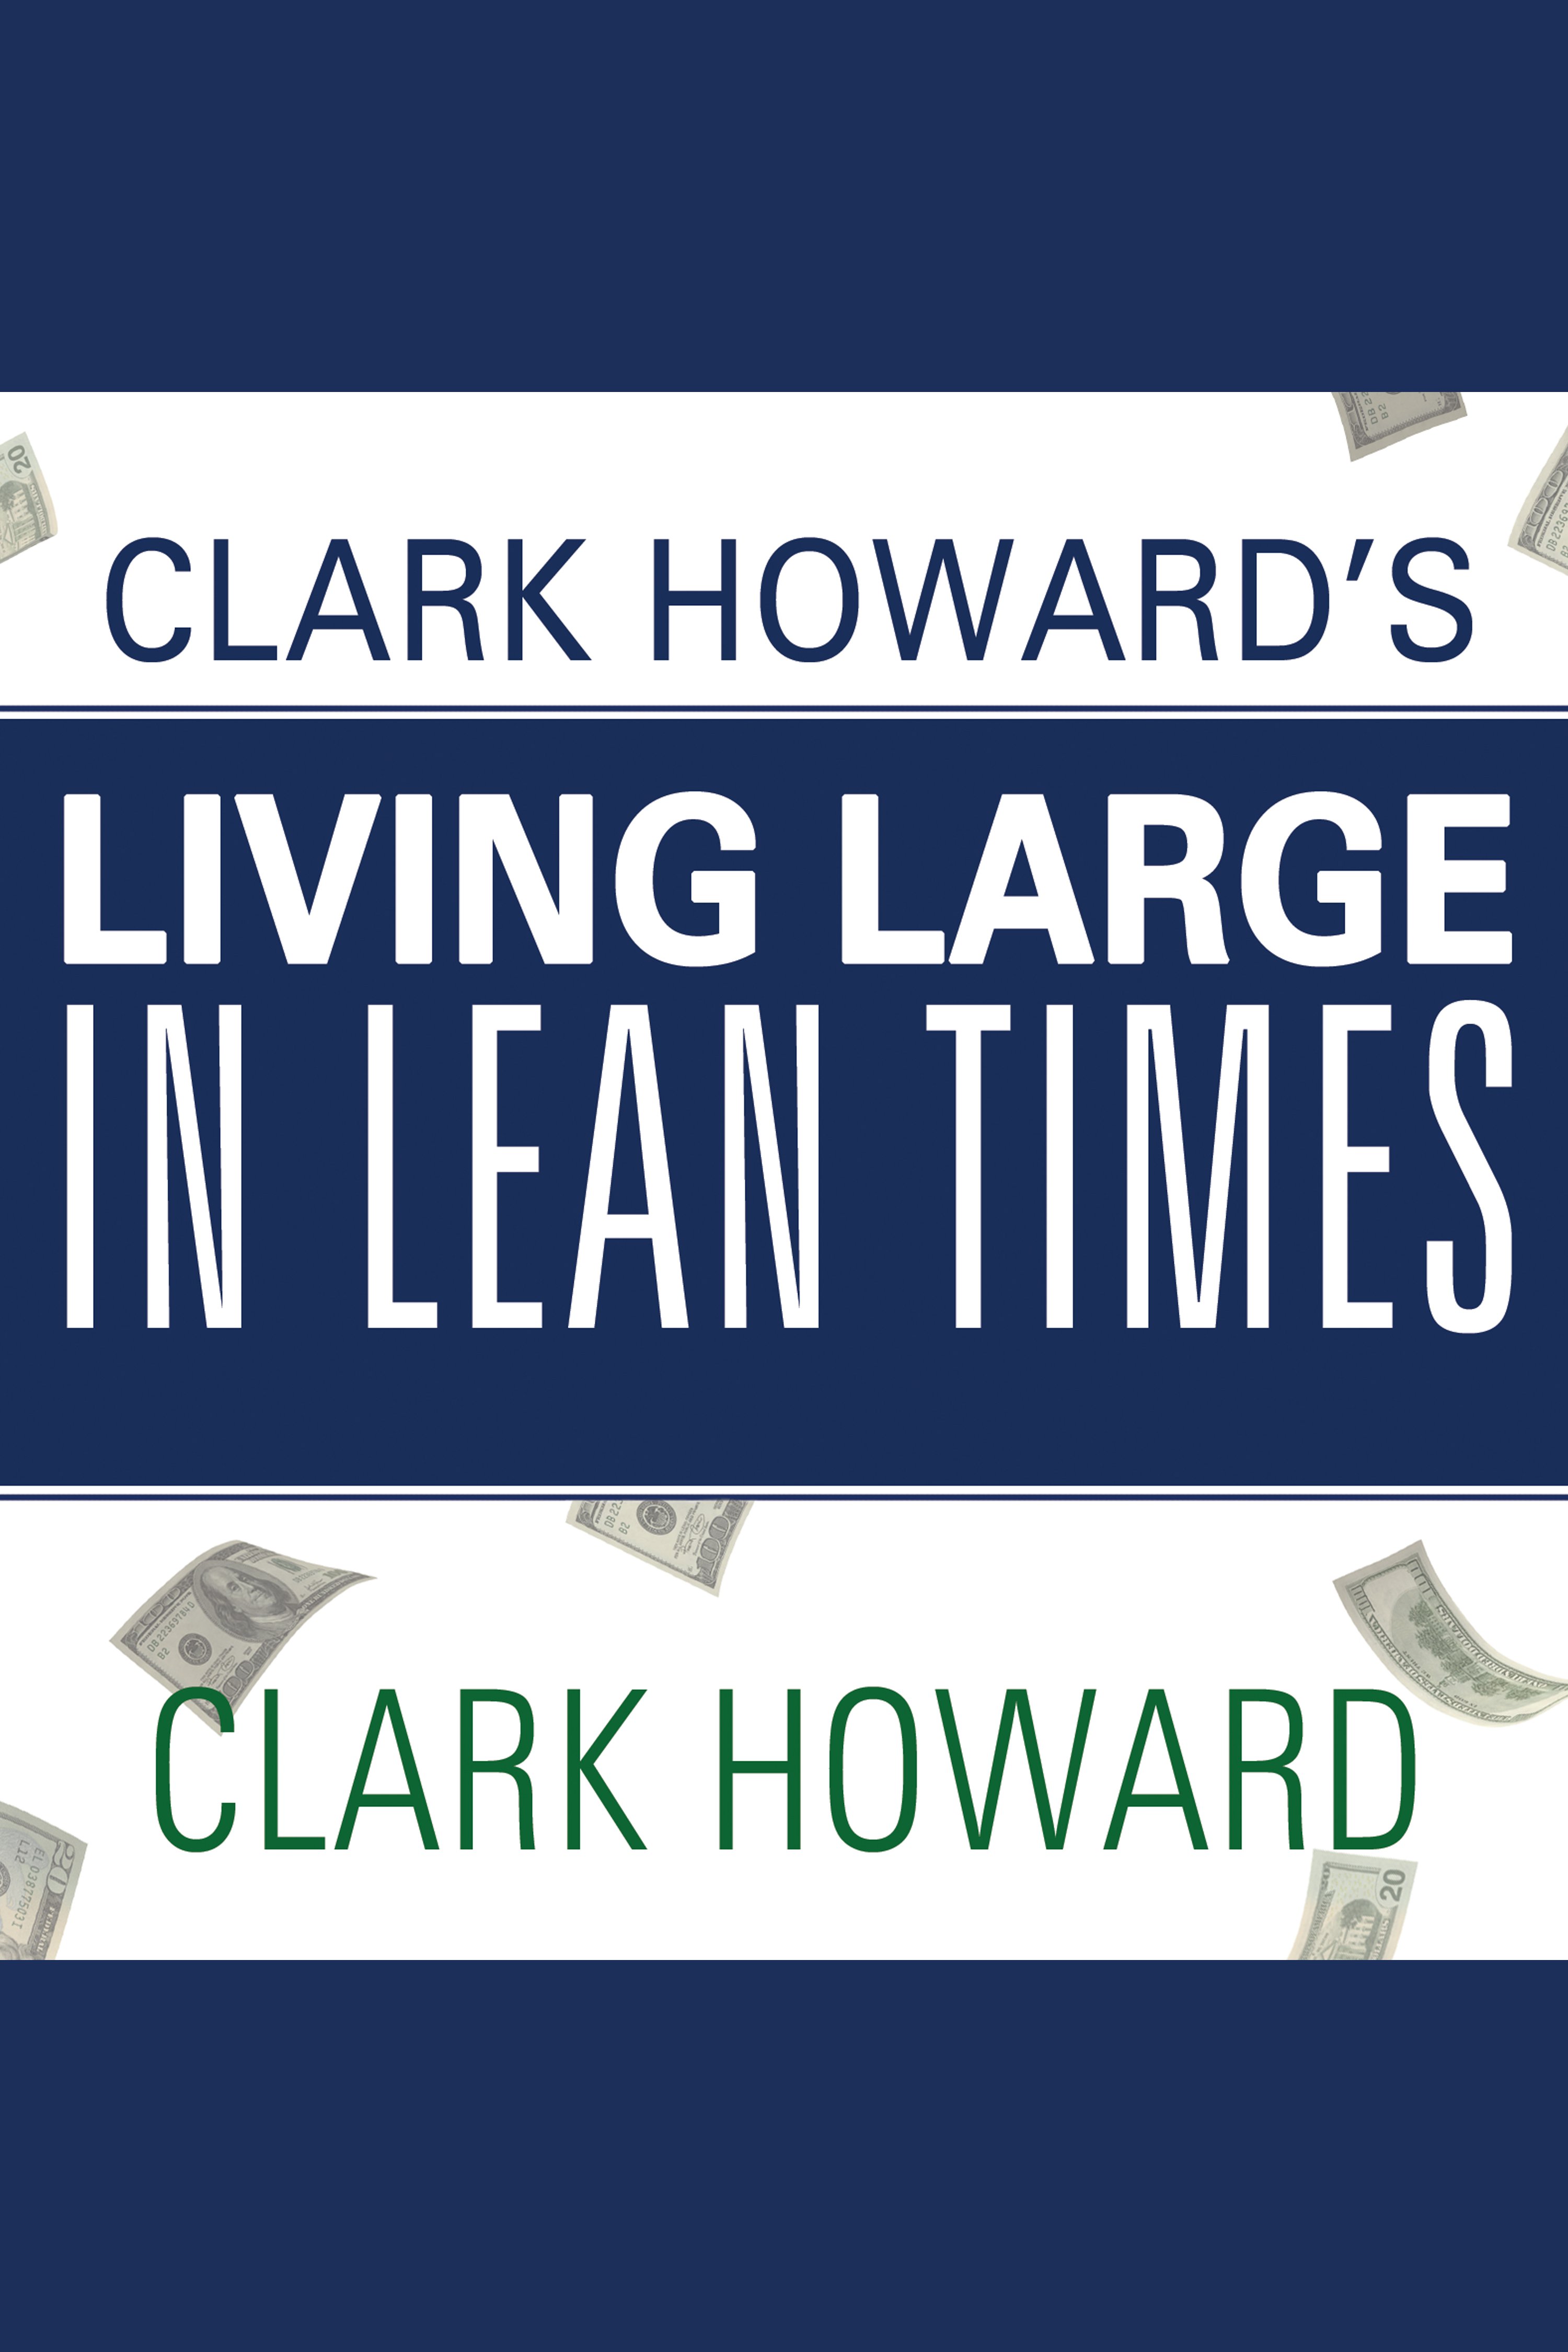 Clark Howard's living large in lean times 250+ ways to buy smarter, spend smarter, and save money cover image